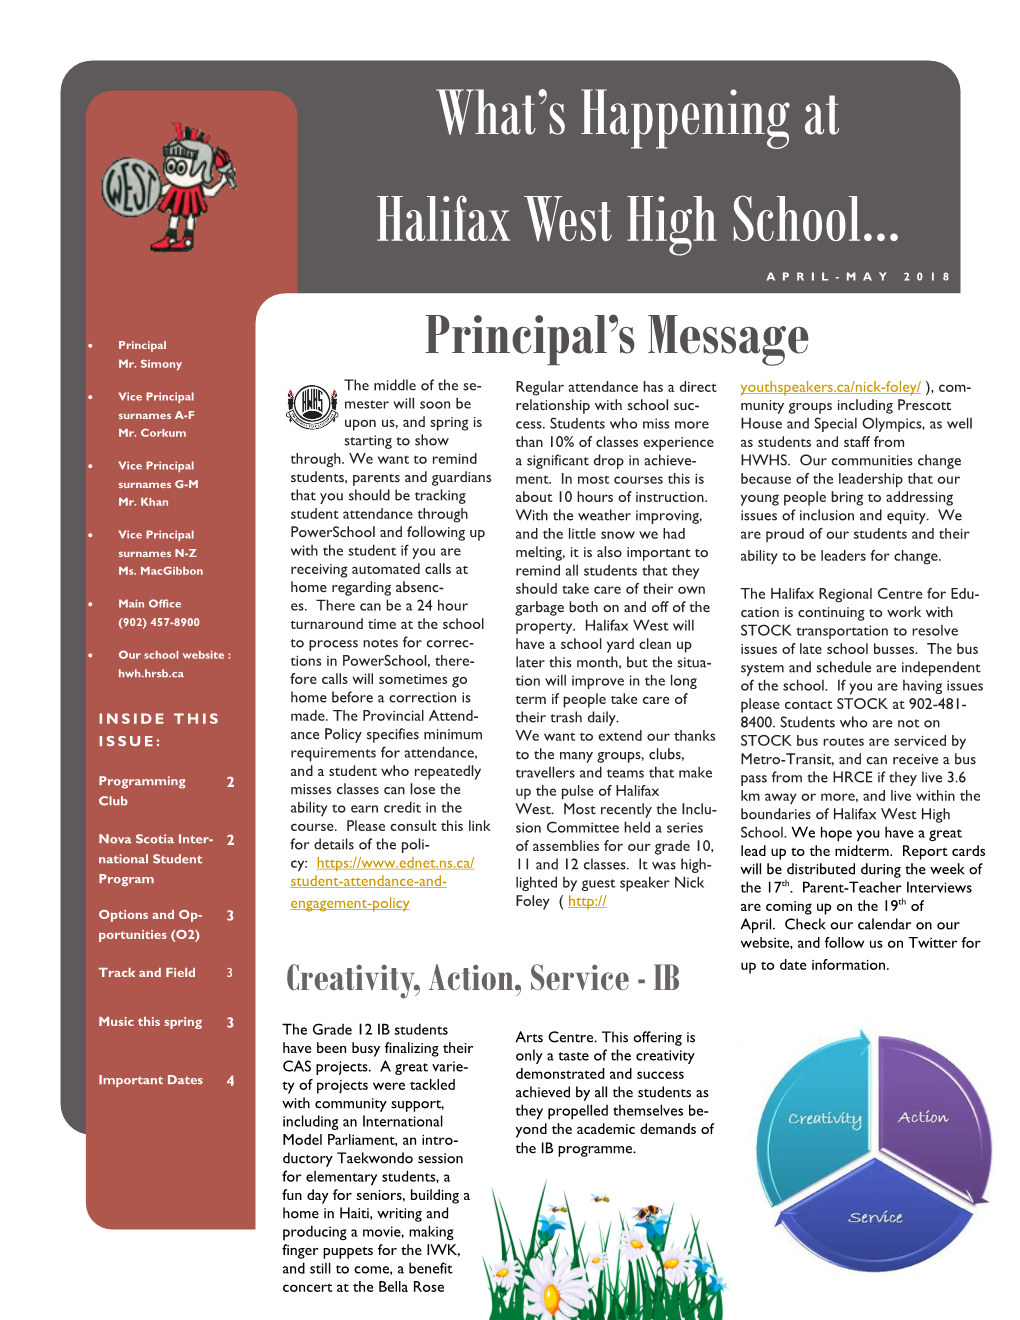 What's Happening at Halifax West High School